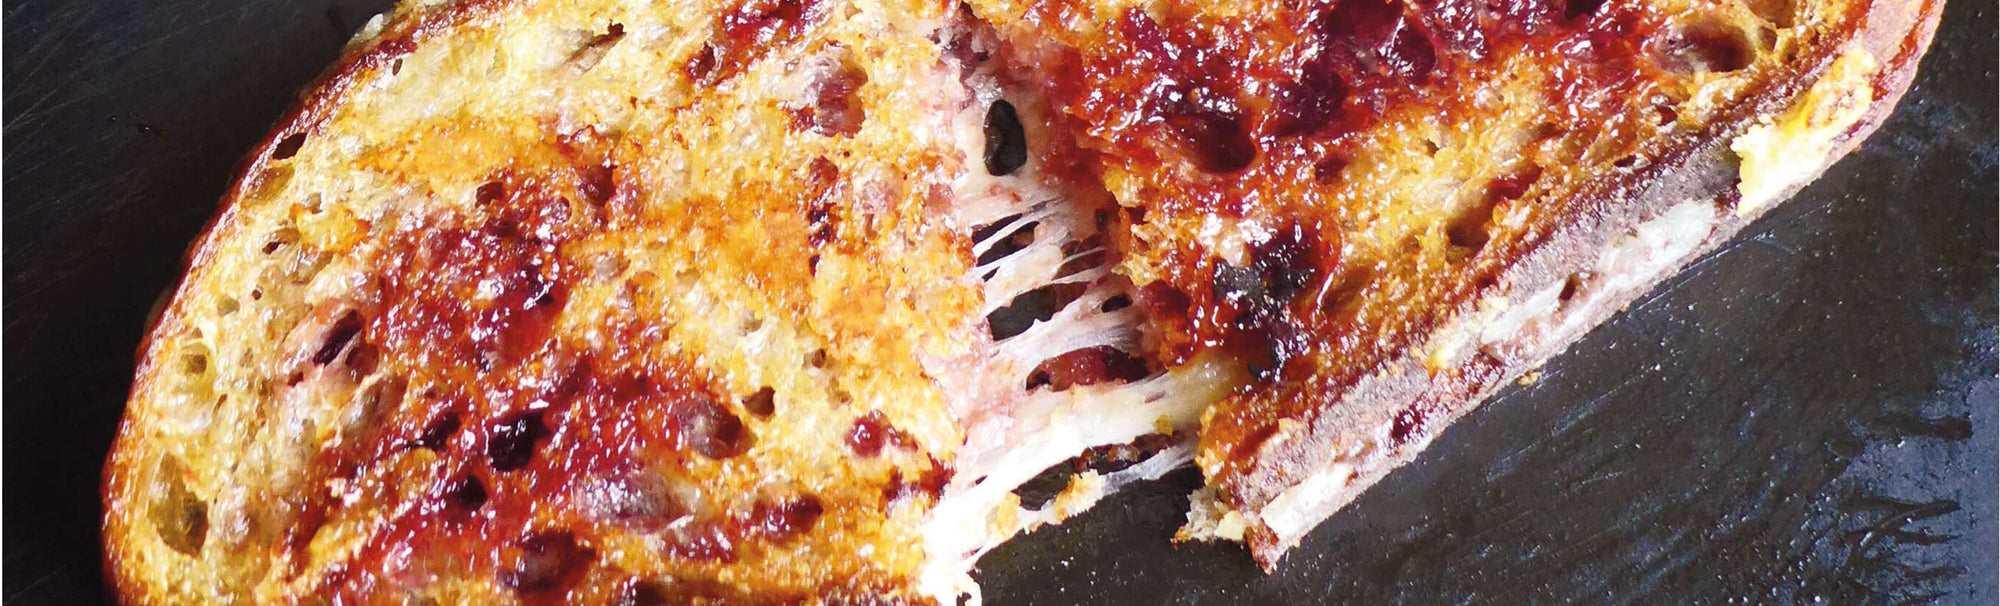 Sour Cherry Spread Grilled Cheese